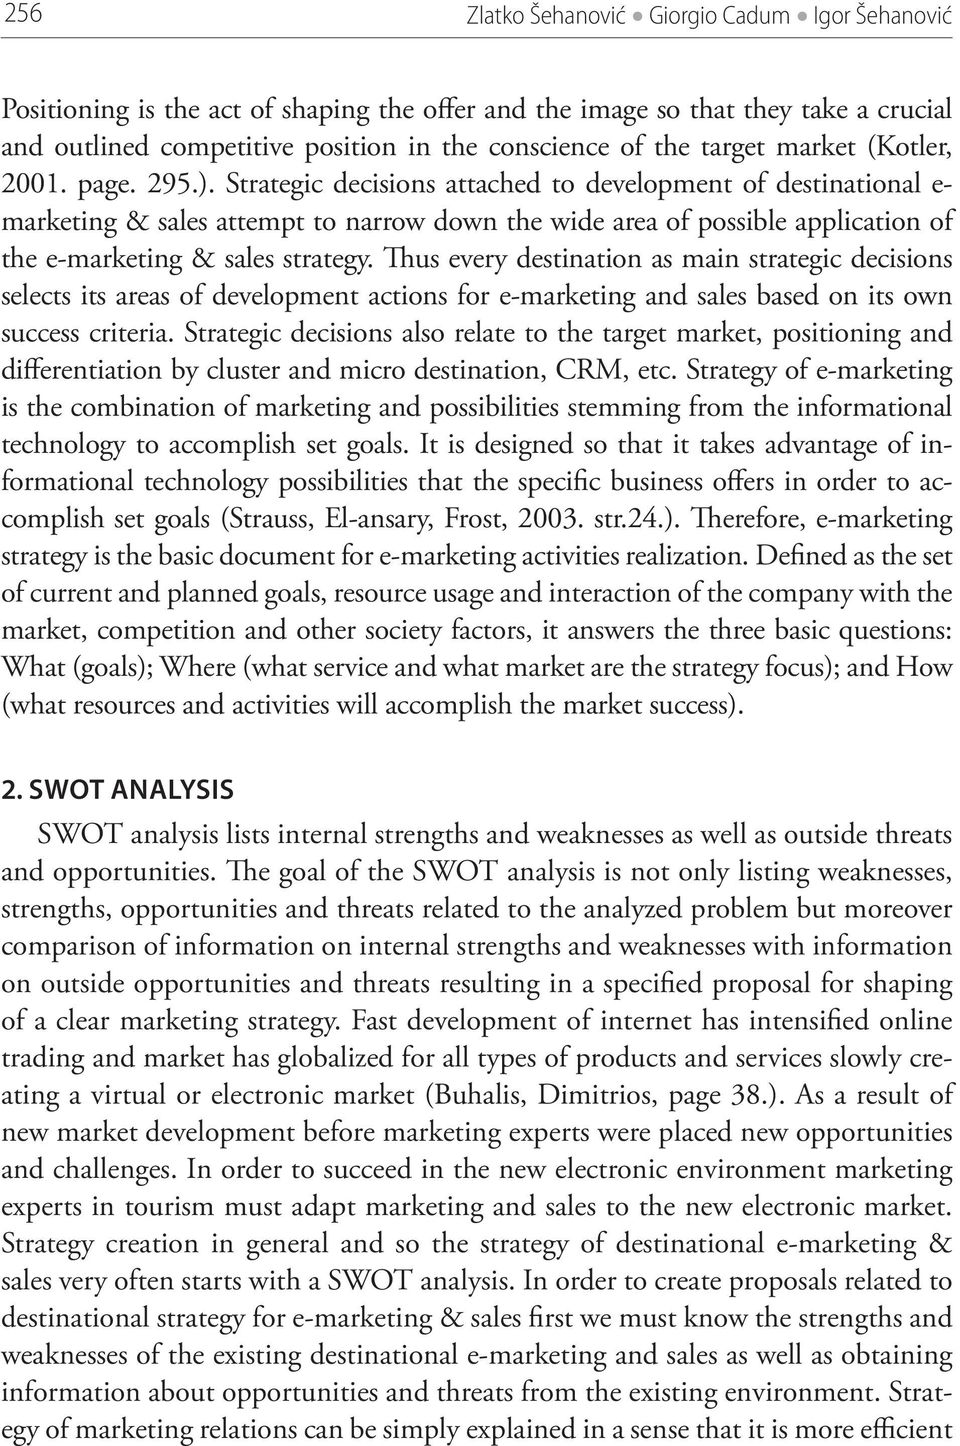 Strategic decisions attached to development of destinational e- marketing & sales attempt to narrow down the wide area of possible application of the e-marketing & sales strategy.